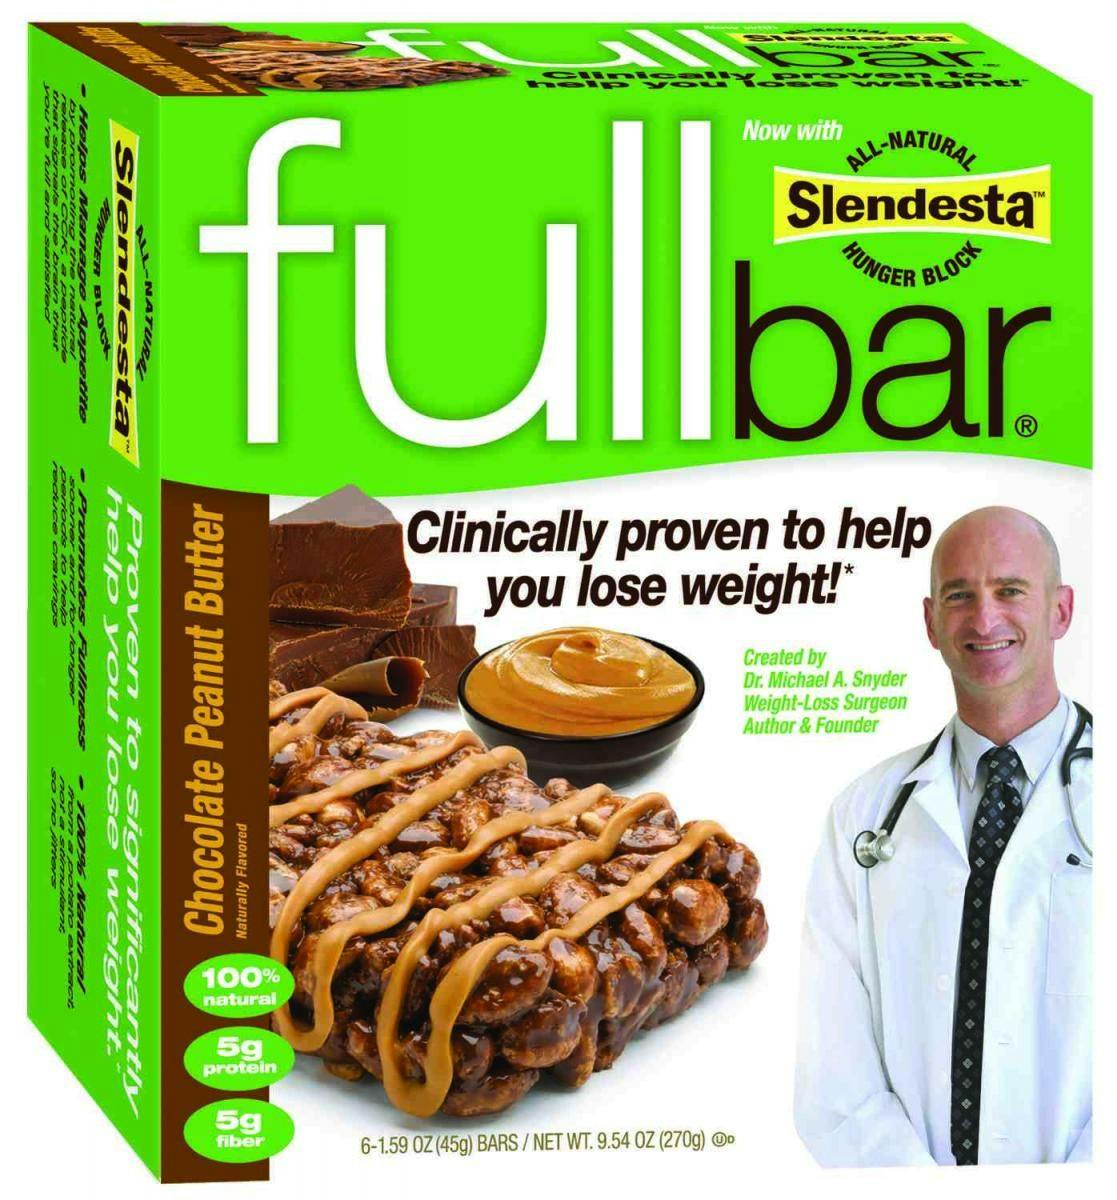 Nutrition Bars: Big Opportunity for Weight Management